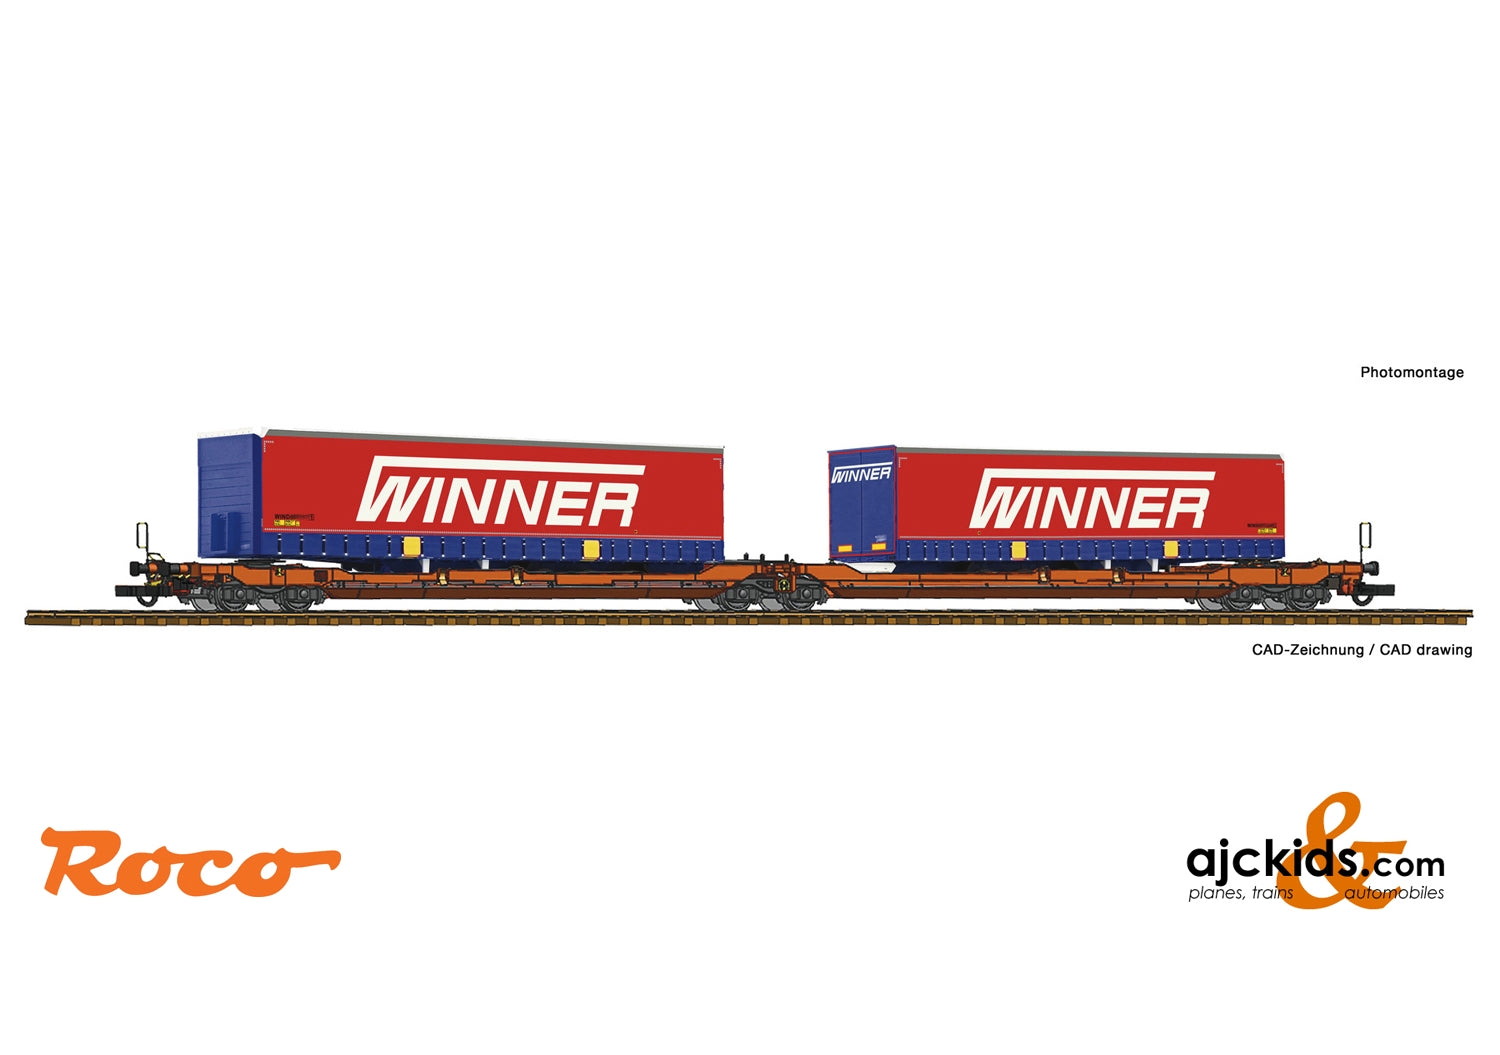 Roco 75889 - Articulated double pocket wagon T3000e + Winner Trailer #3 Display 75886